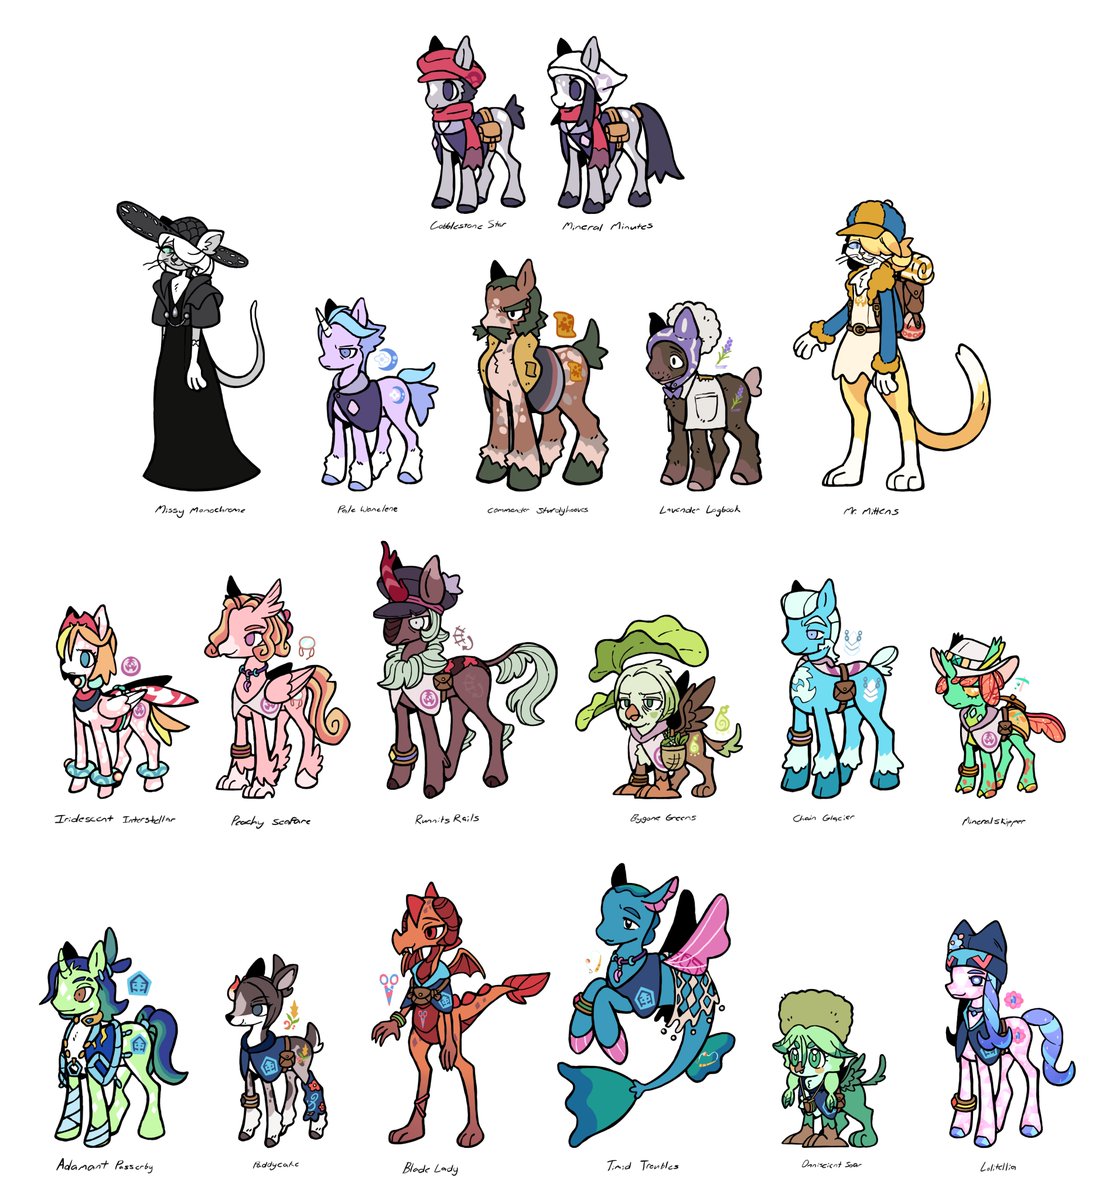 (Closeups in replies) The PLA MLP au designs are finally all finished! There is definitely room for change if needed both with designs and names, but overall I'm very happy with how everybody (or I guess everypony) turned out! 
#PLA #PokemonLegendsArceus #mlpfim